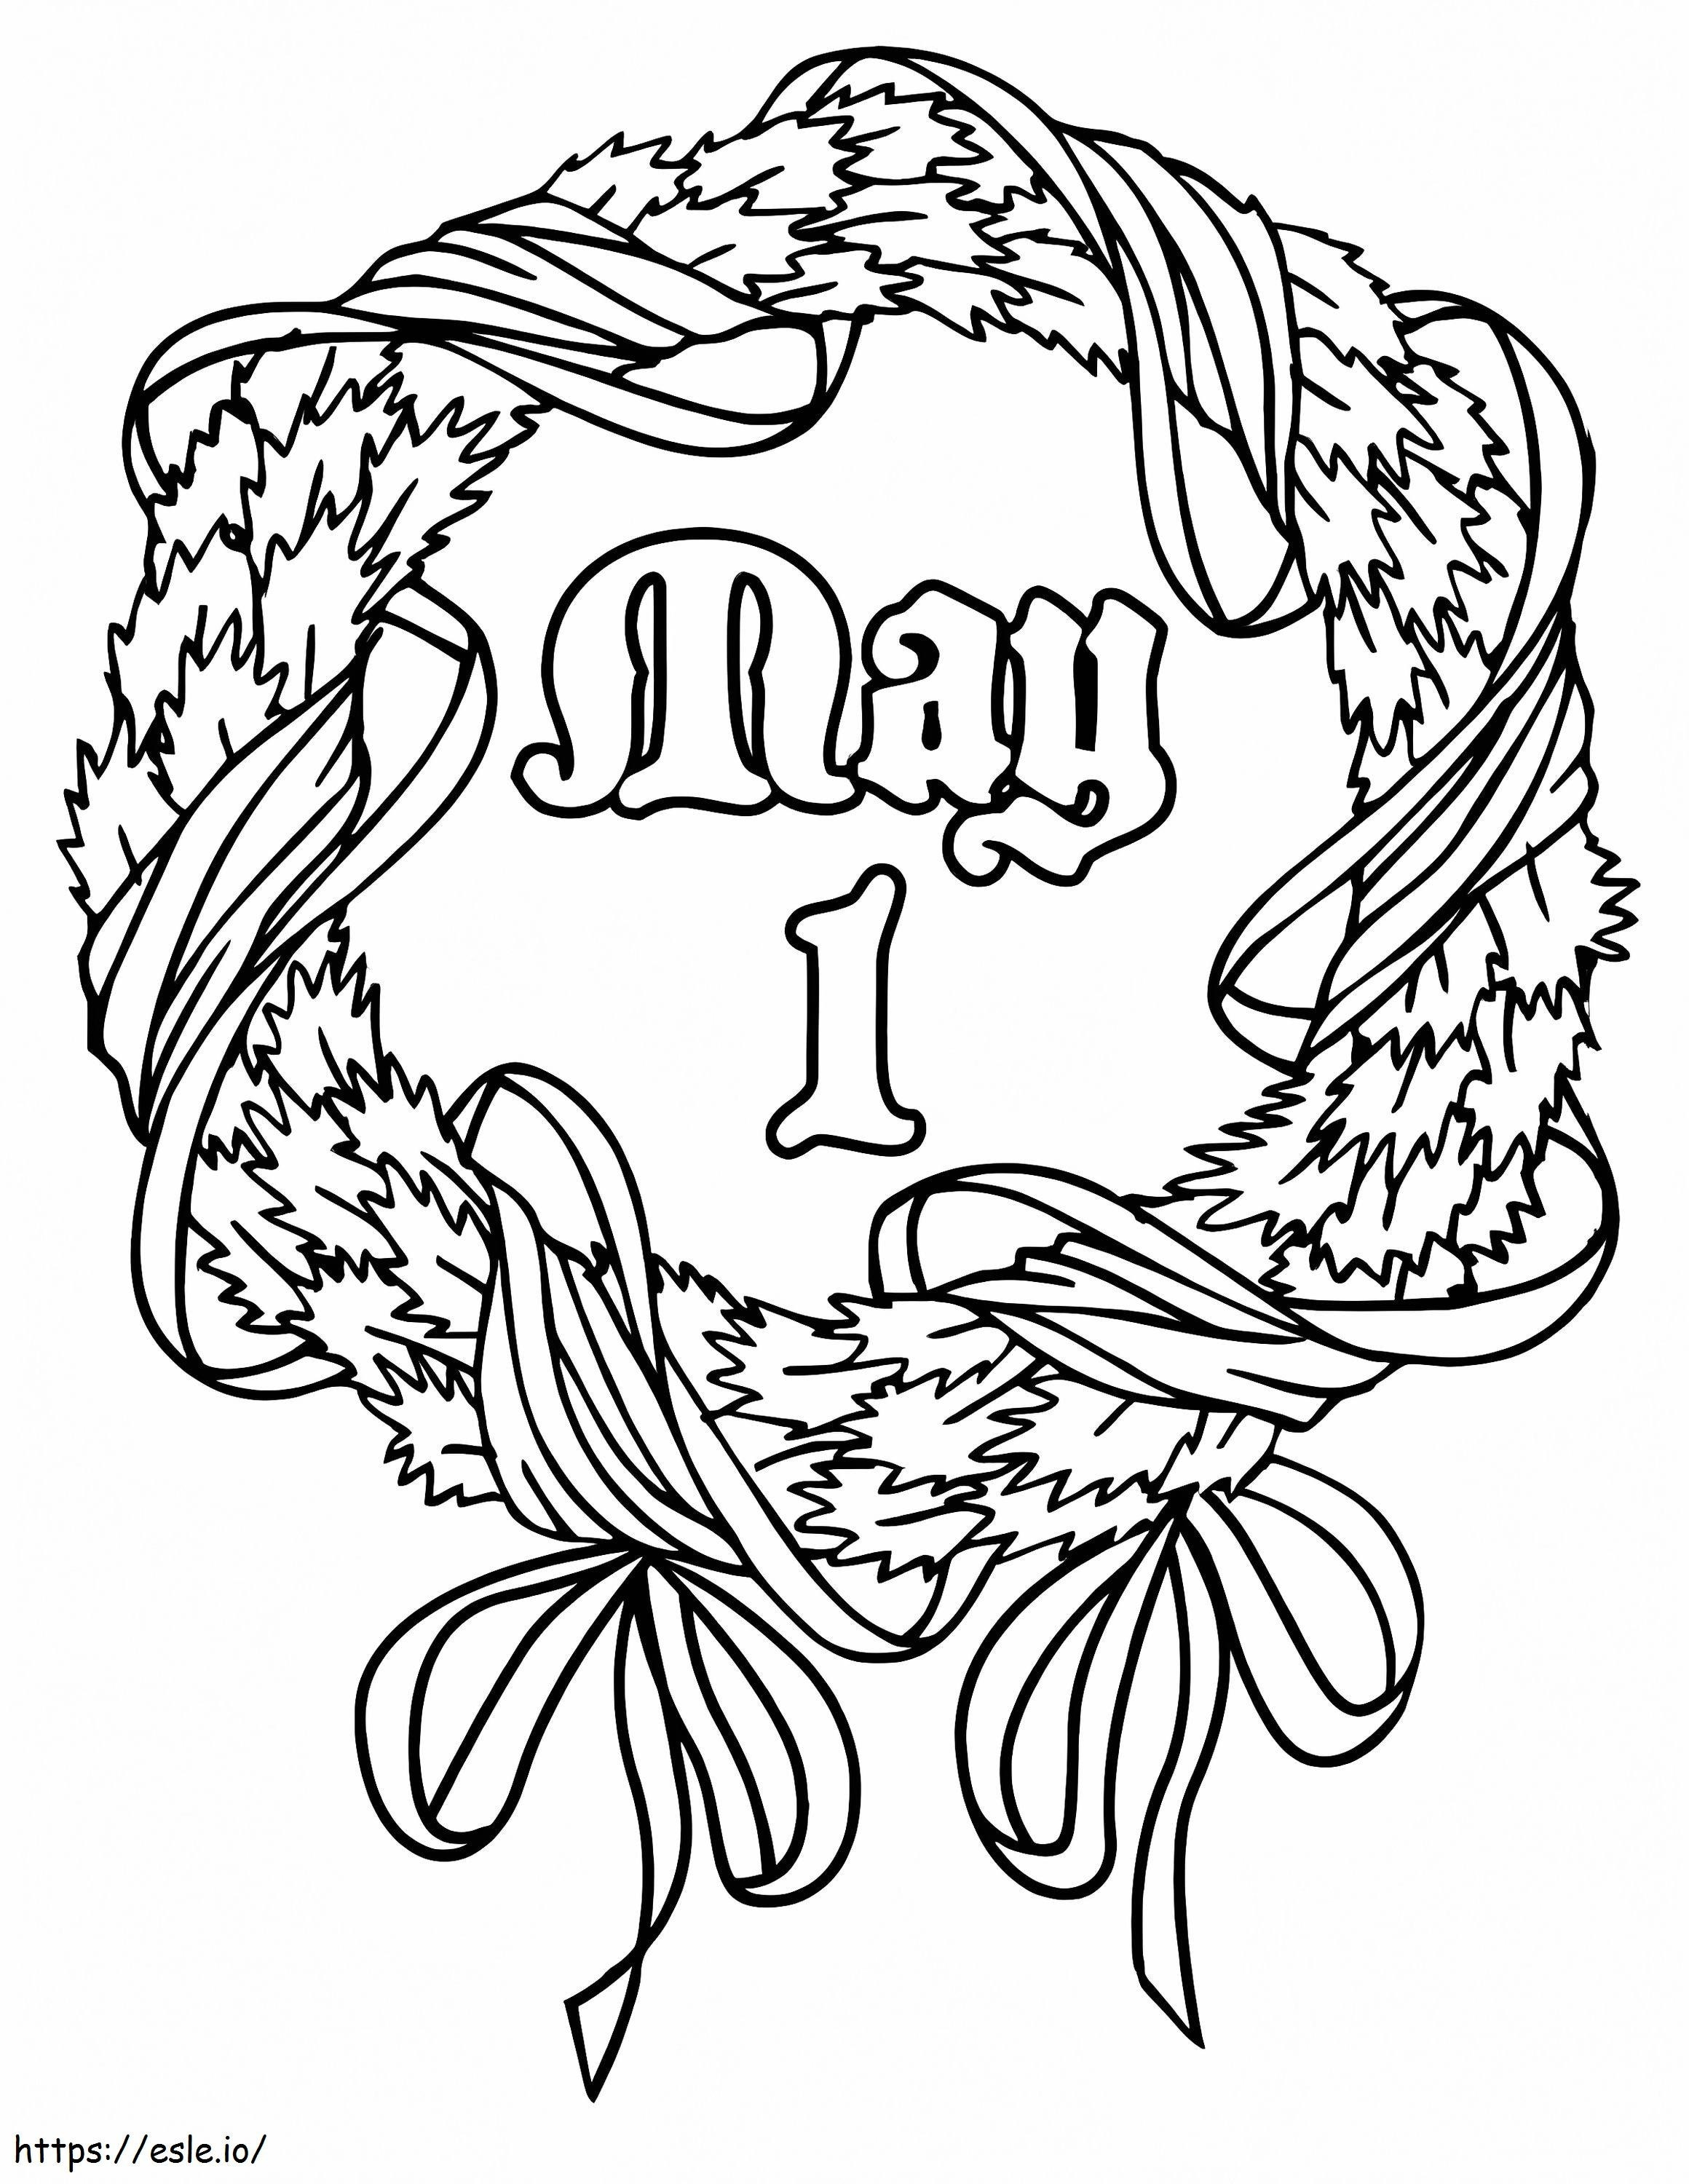 May Day Wreath coloring page